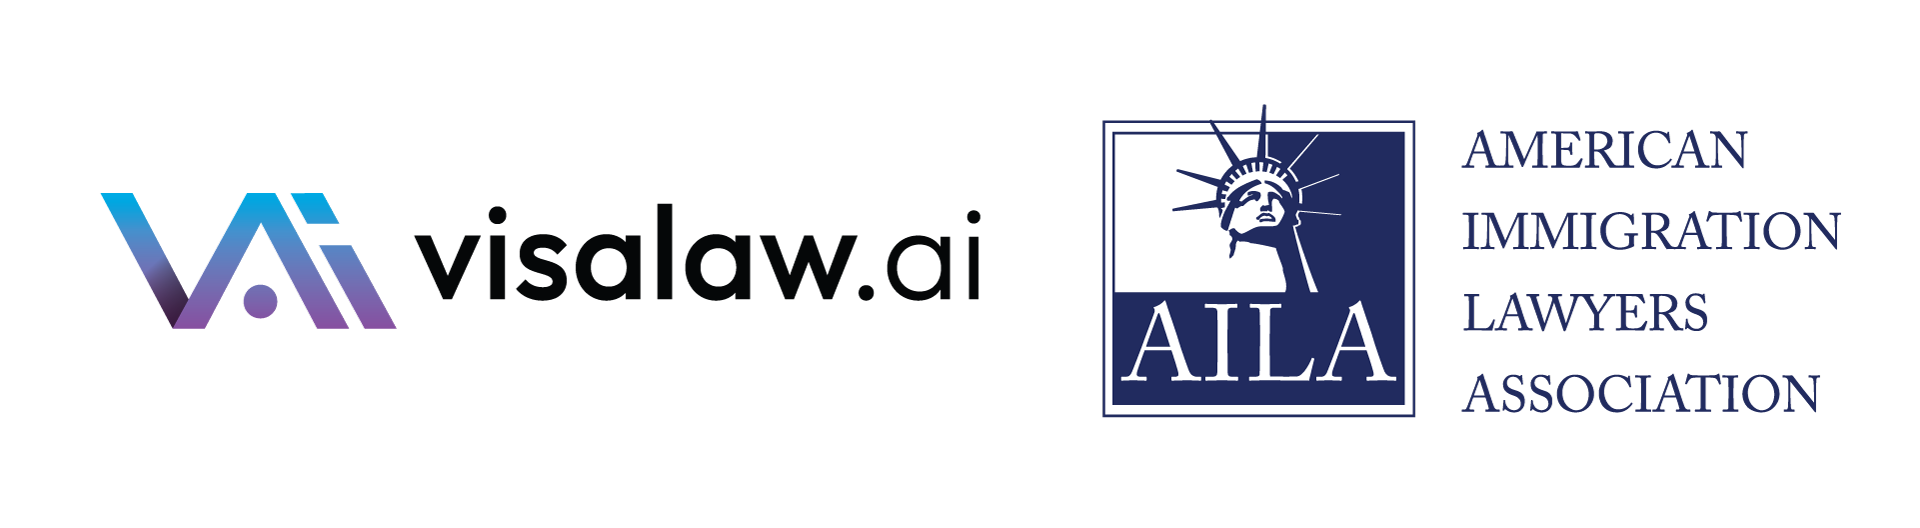 Logos of visalaw.ai and American Immigration Lawyers Association